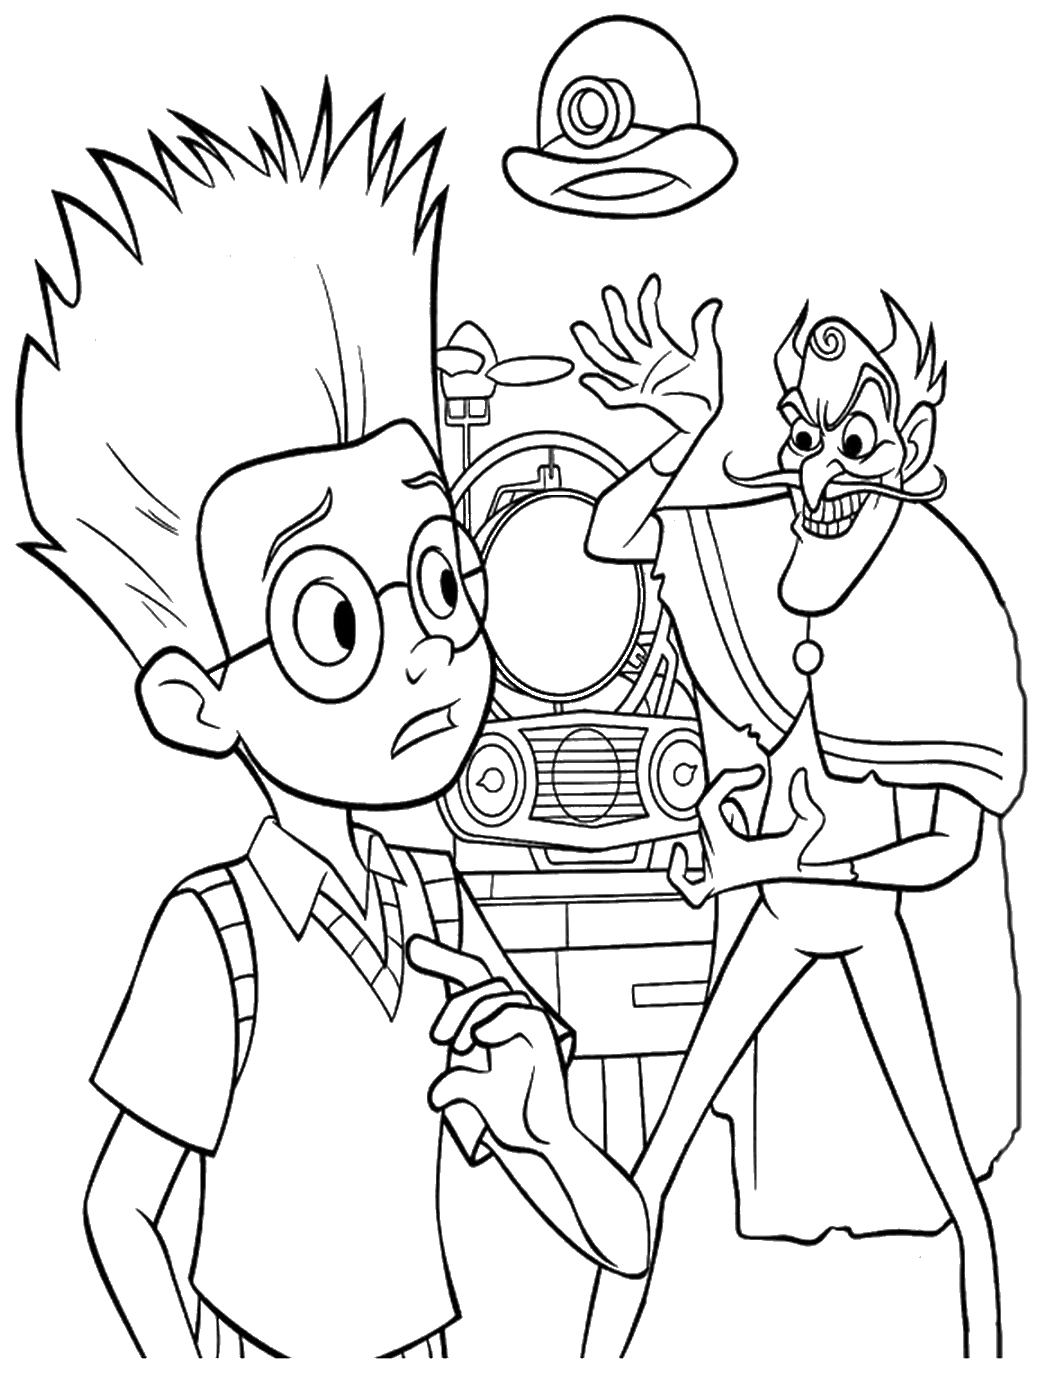 meet the robinsons coloring pages franny robinson coloring page free printable coloring pages robinsons meet pages coloring the 